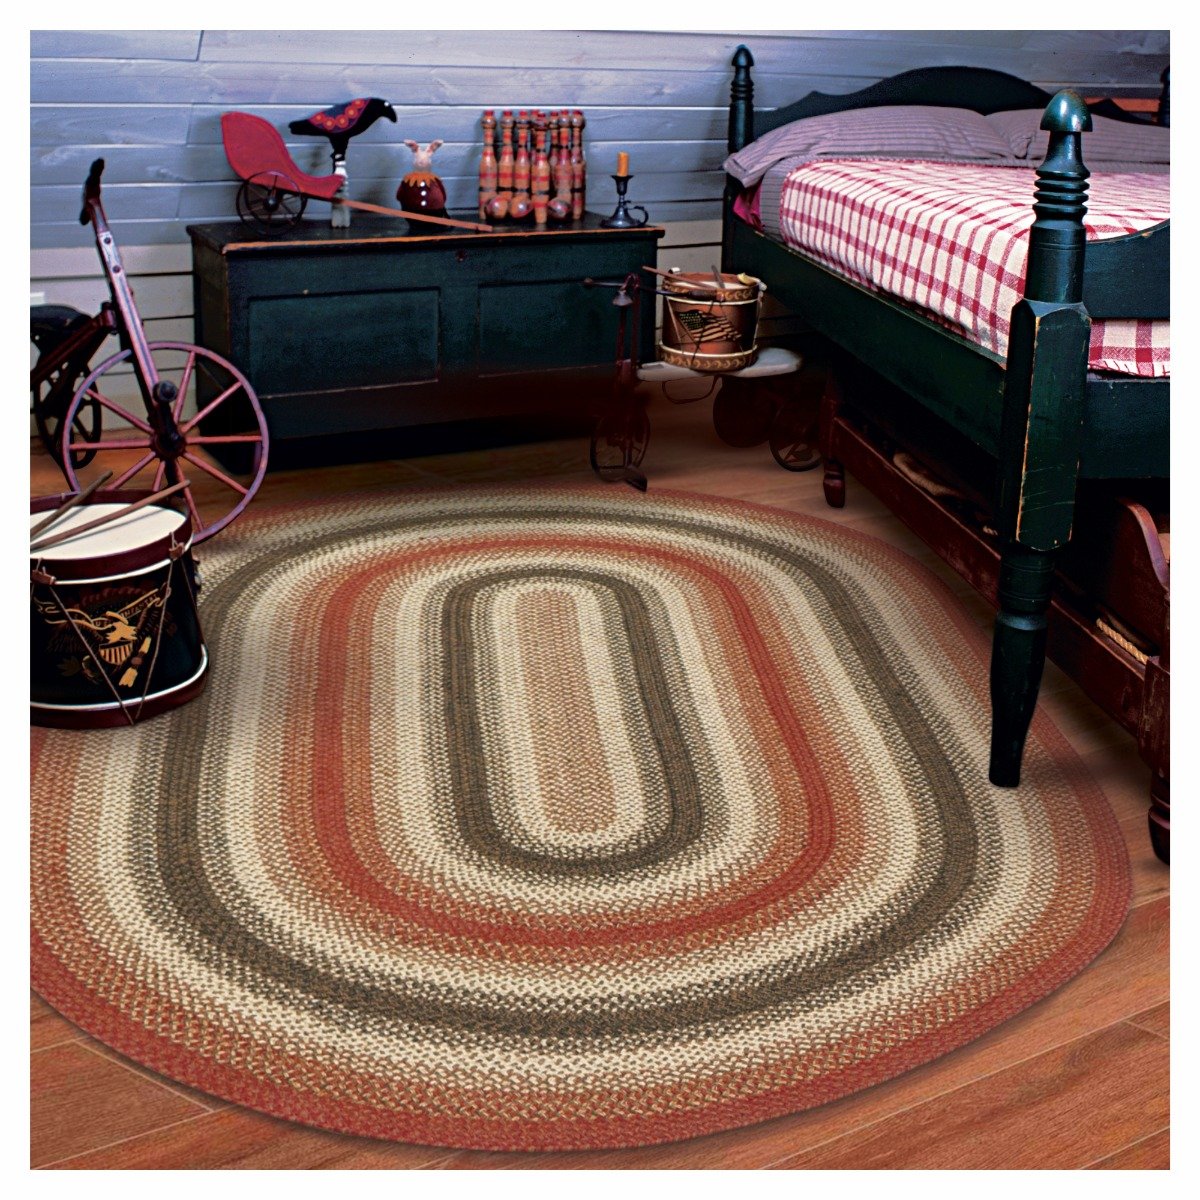 Chester Red-Cream-Brown Oval Jute Braided Rugs Reversible